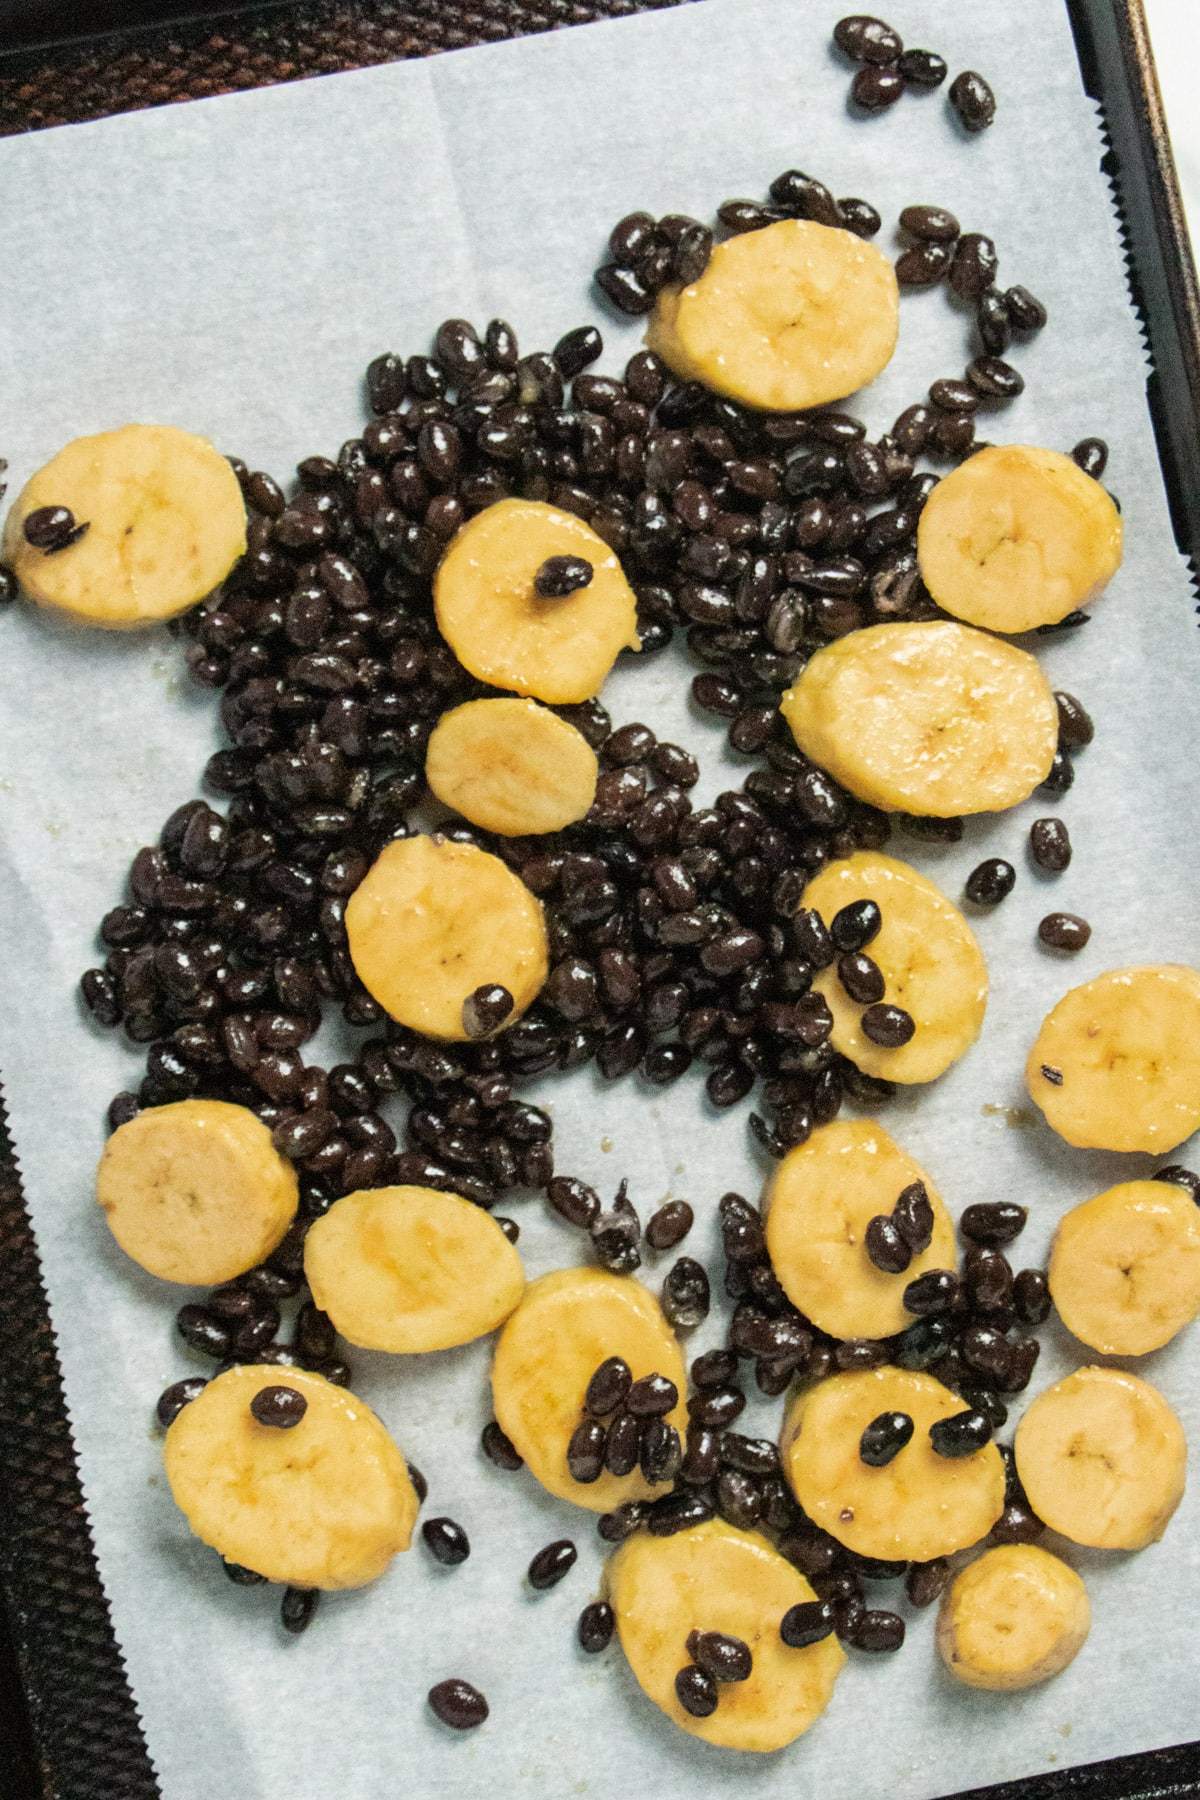 plantains and black beans spread out on a lined baking sheet